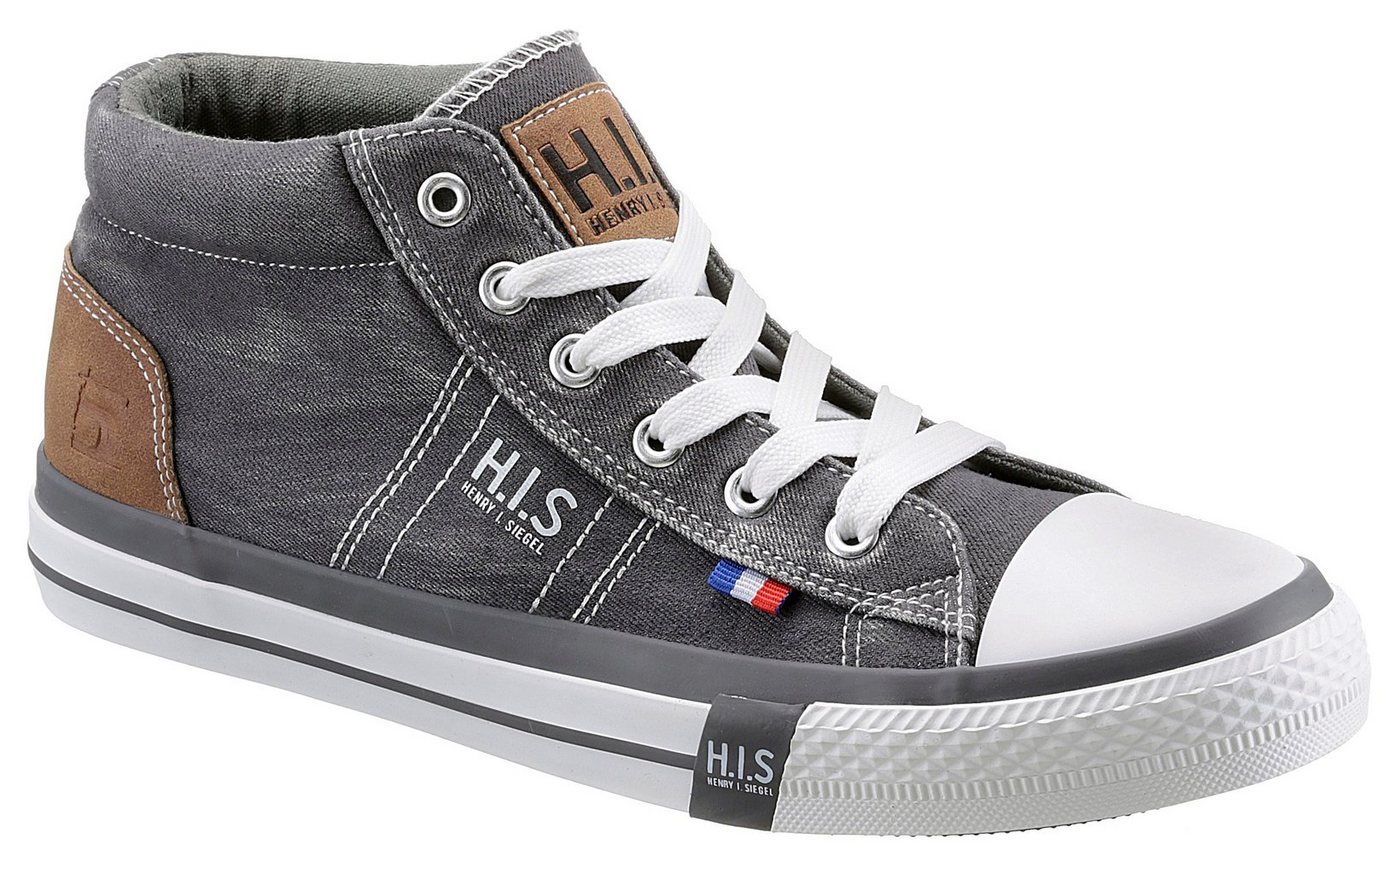 H.I.S Sneaker mit Jeans Used-Look von H.I.S